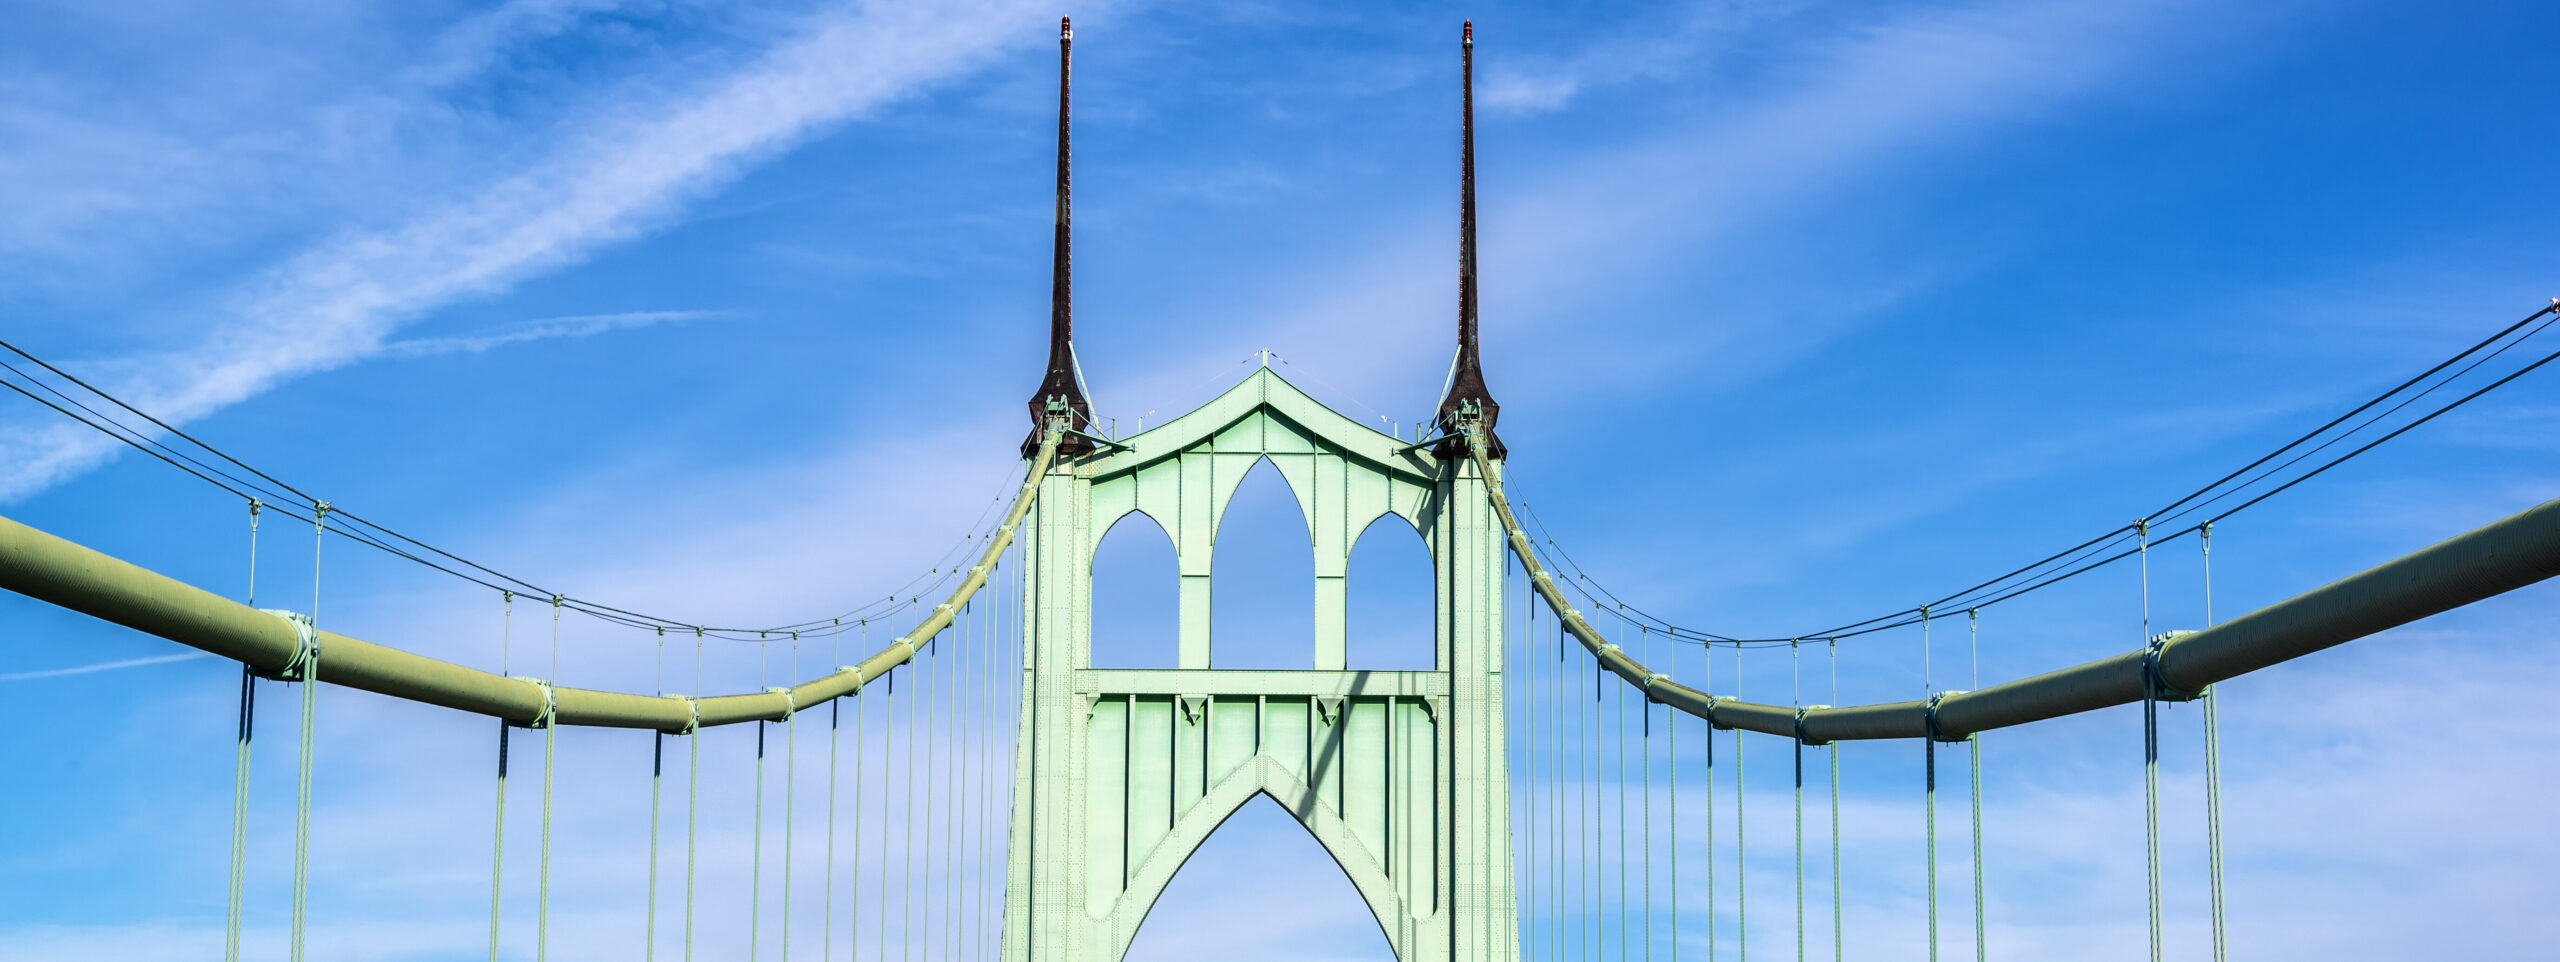 Top view of the St. Johns Bridge with a blue sky background